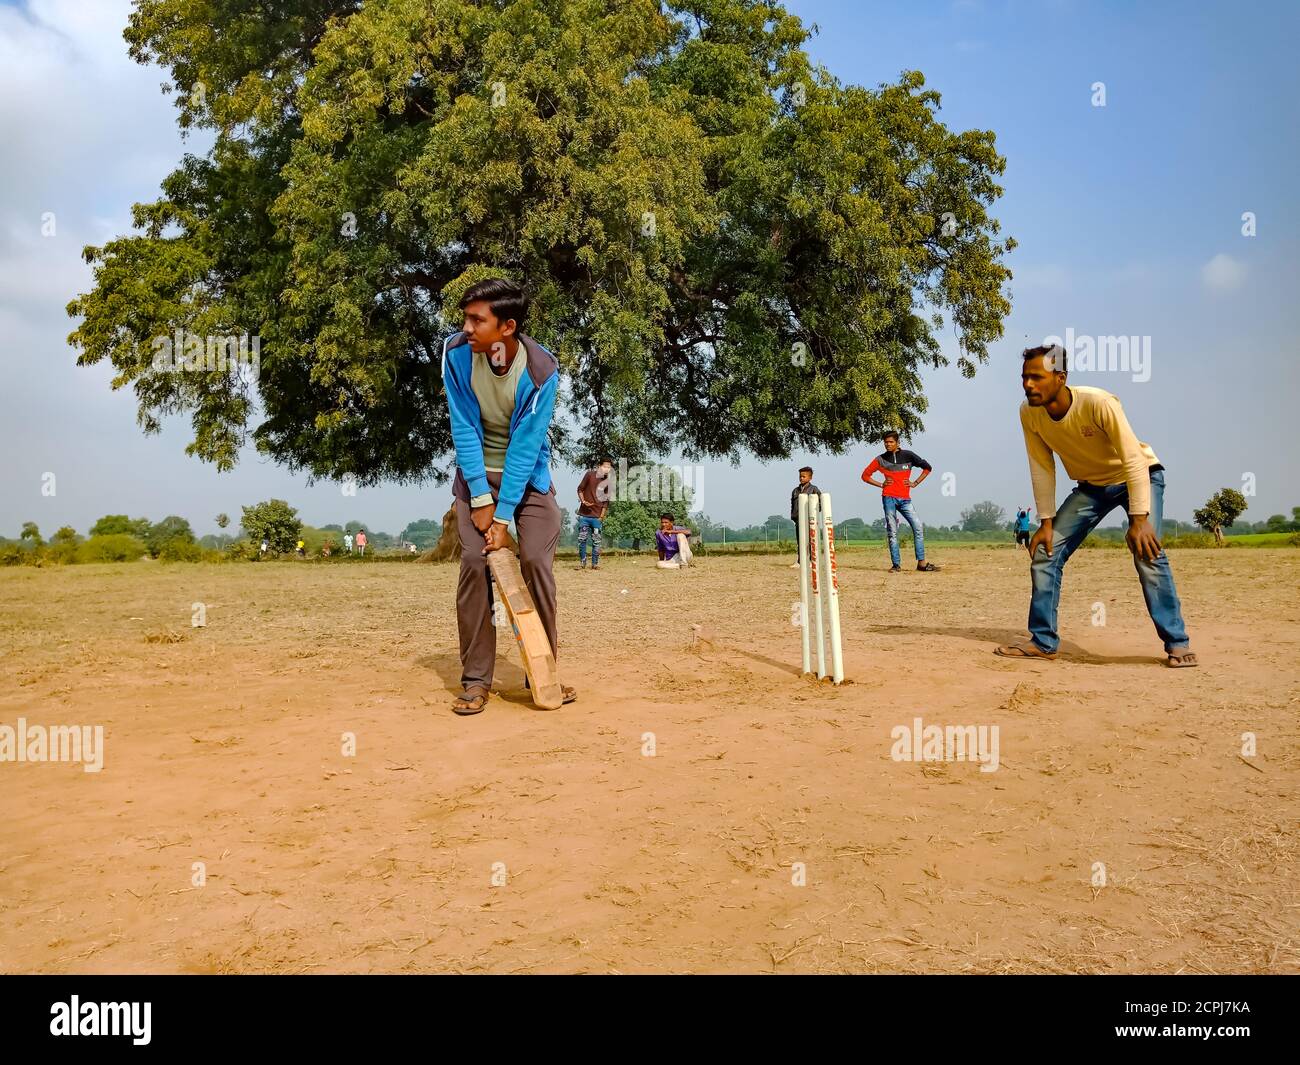 DISTRICT KATNI, INDIA - JANUARY 01, 2020: Asian poor village children groups playing cricket at countryside rural environment. Stock Photo